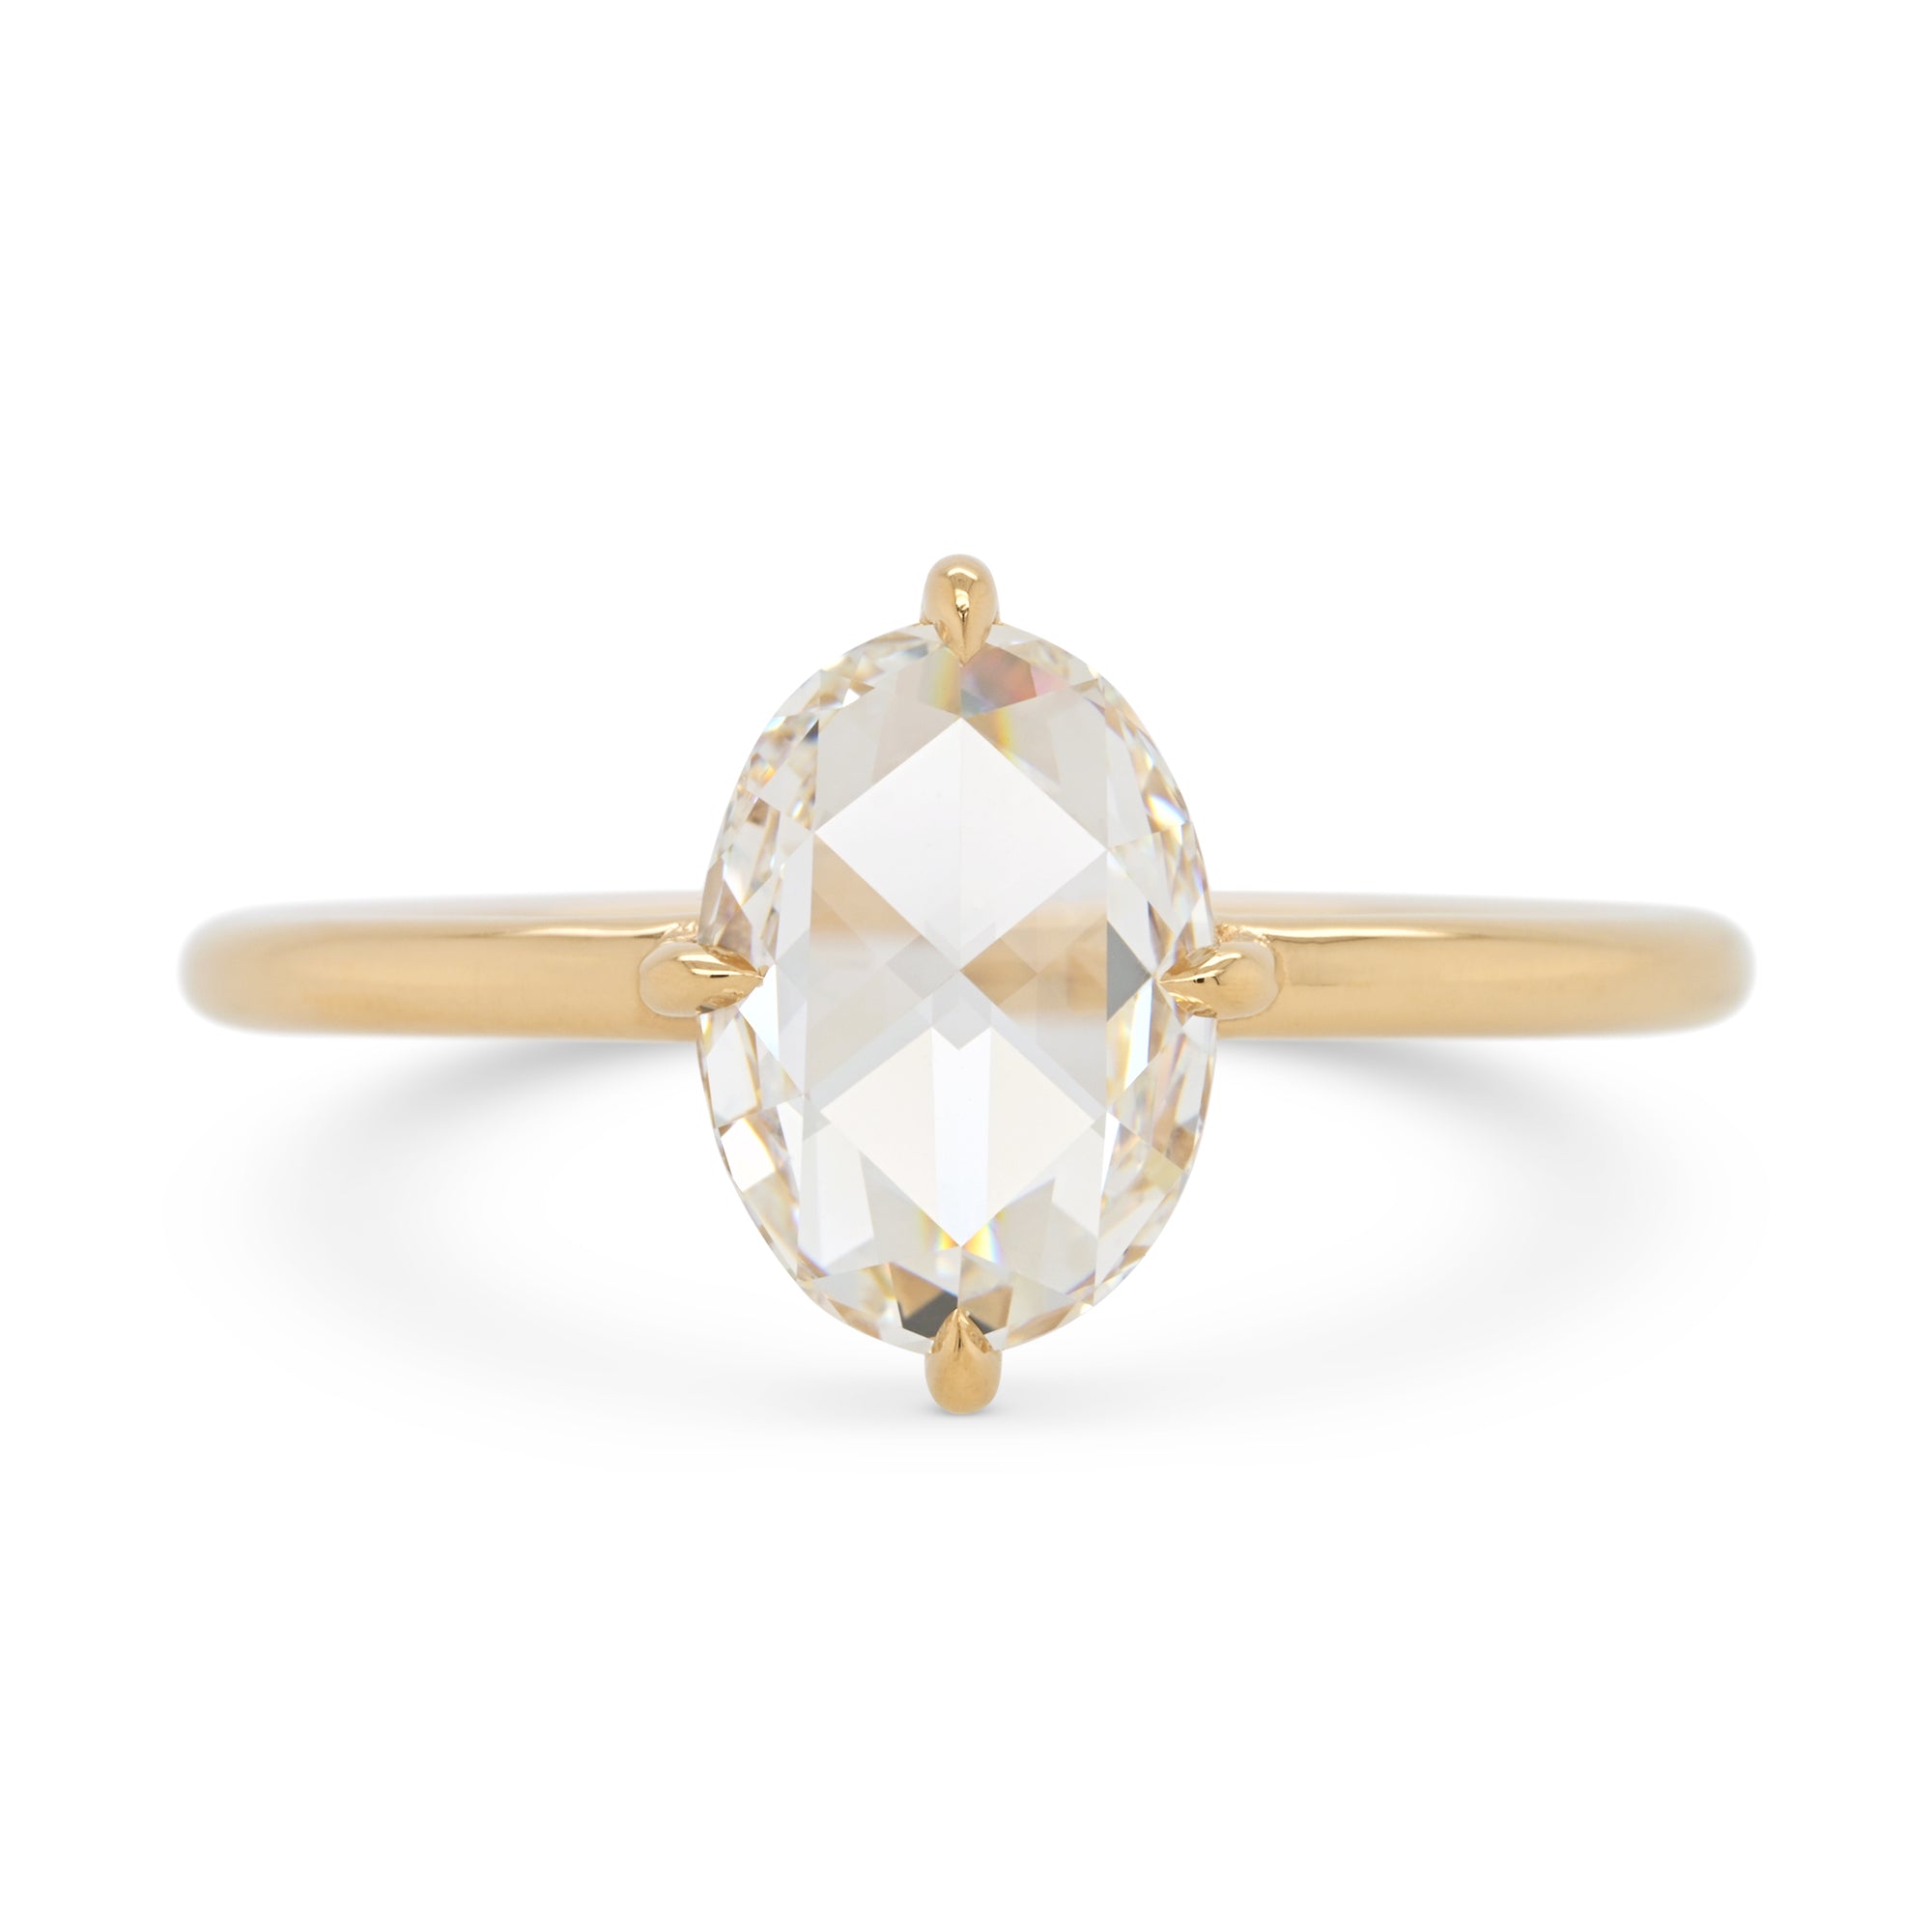 Rose cut oval diamond in a 14k yellow gold solitaire engagement ring setting